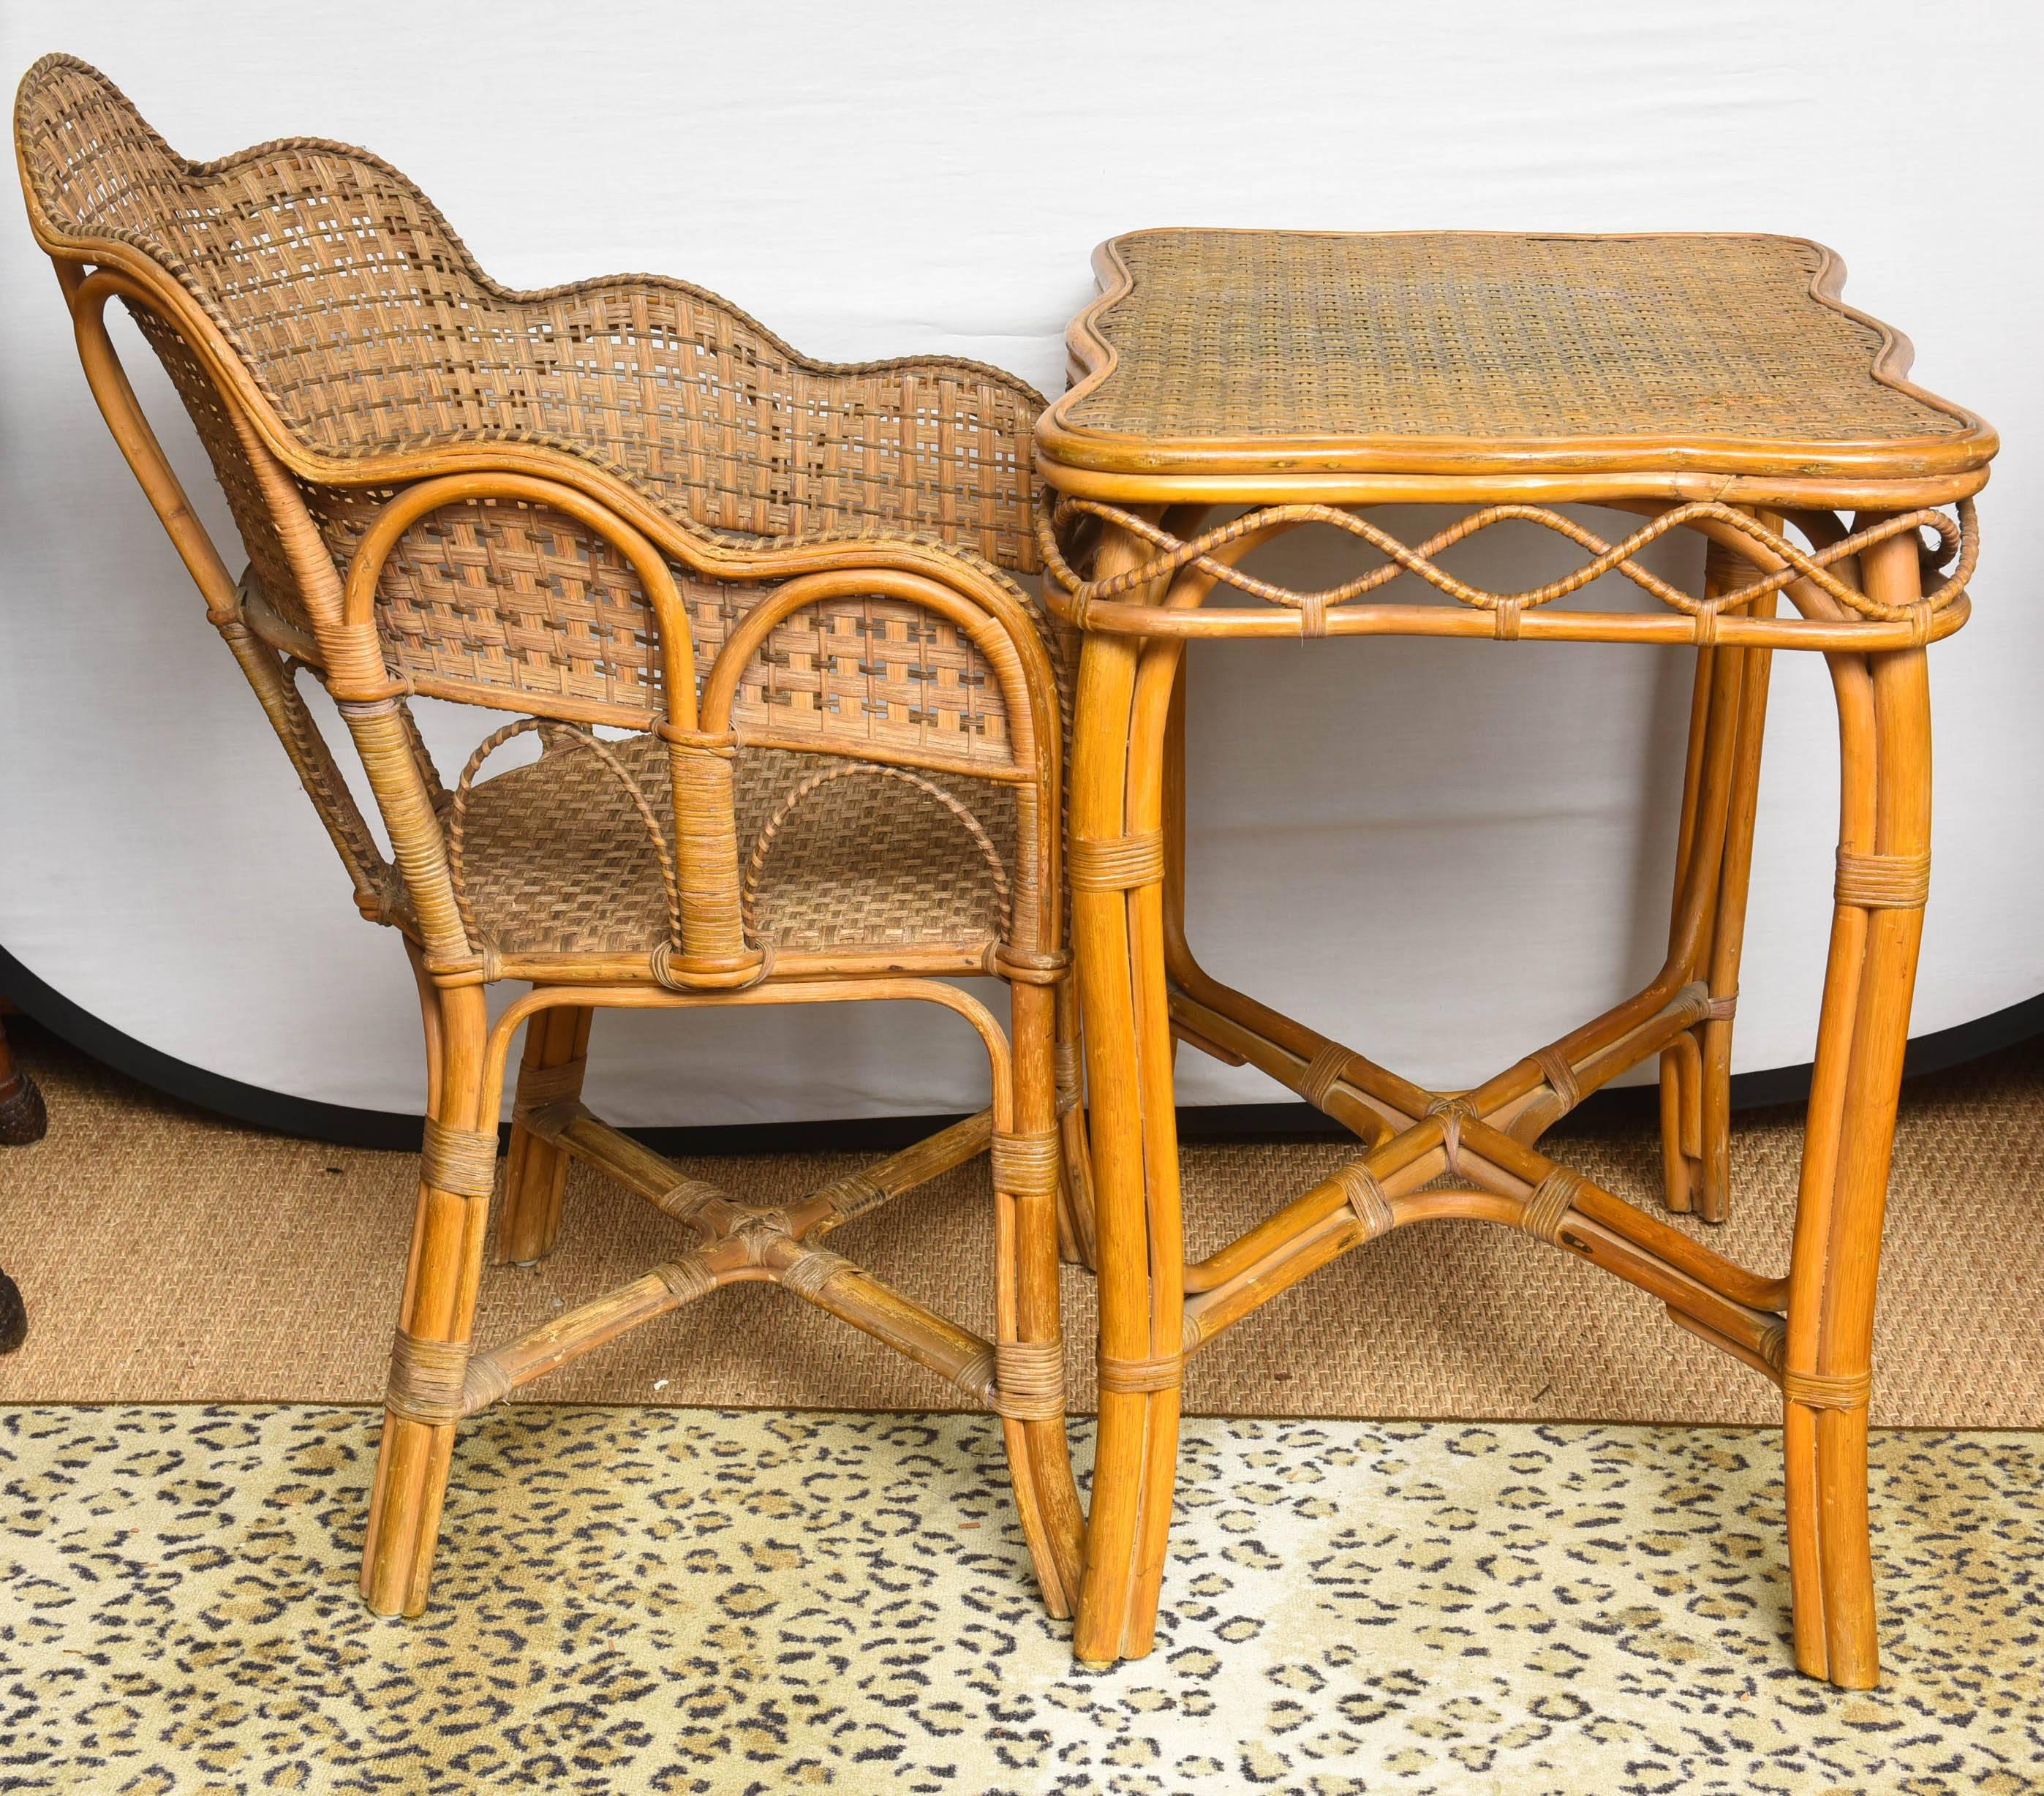 Very elaborate French Rattan chair with the matching table. Dimensions: H 30, W 28, D 20.